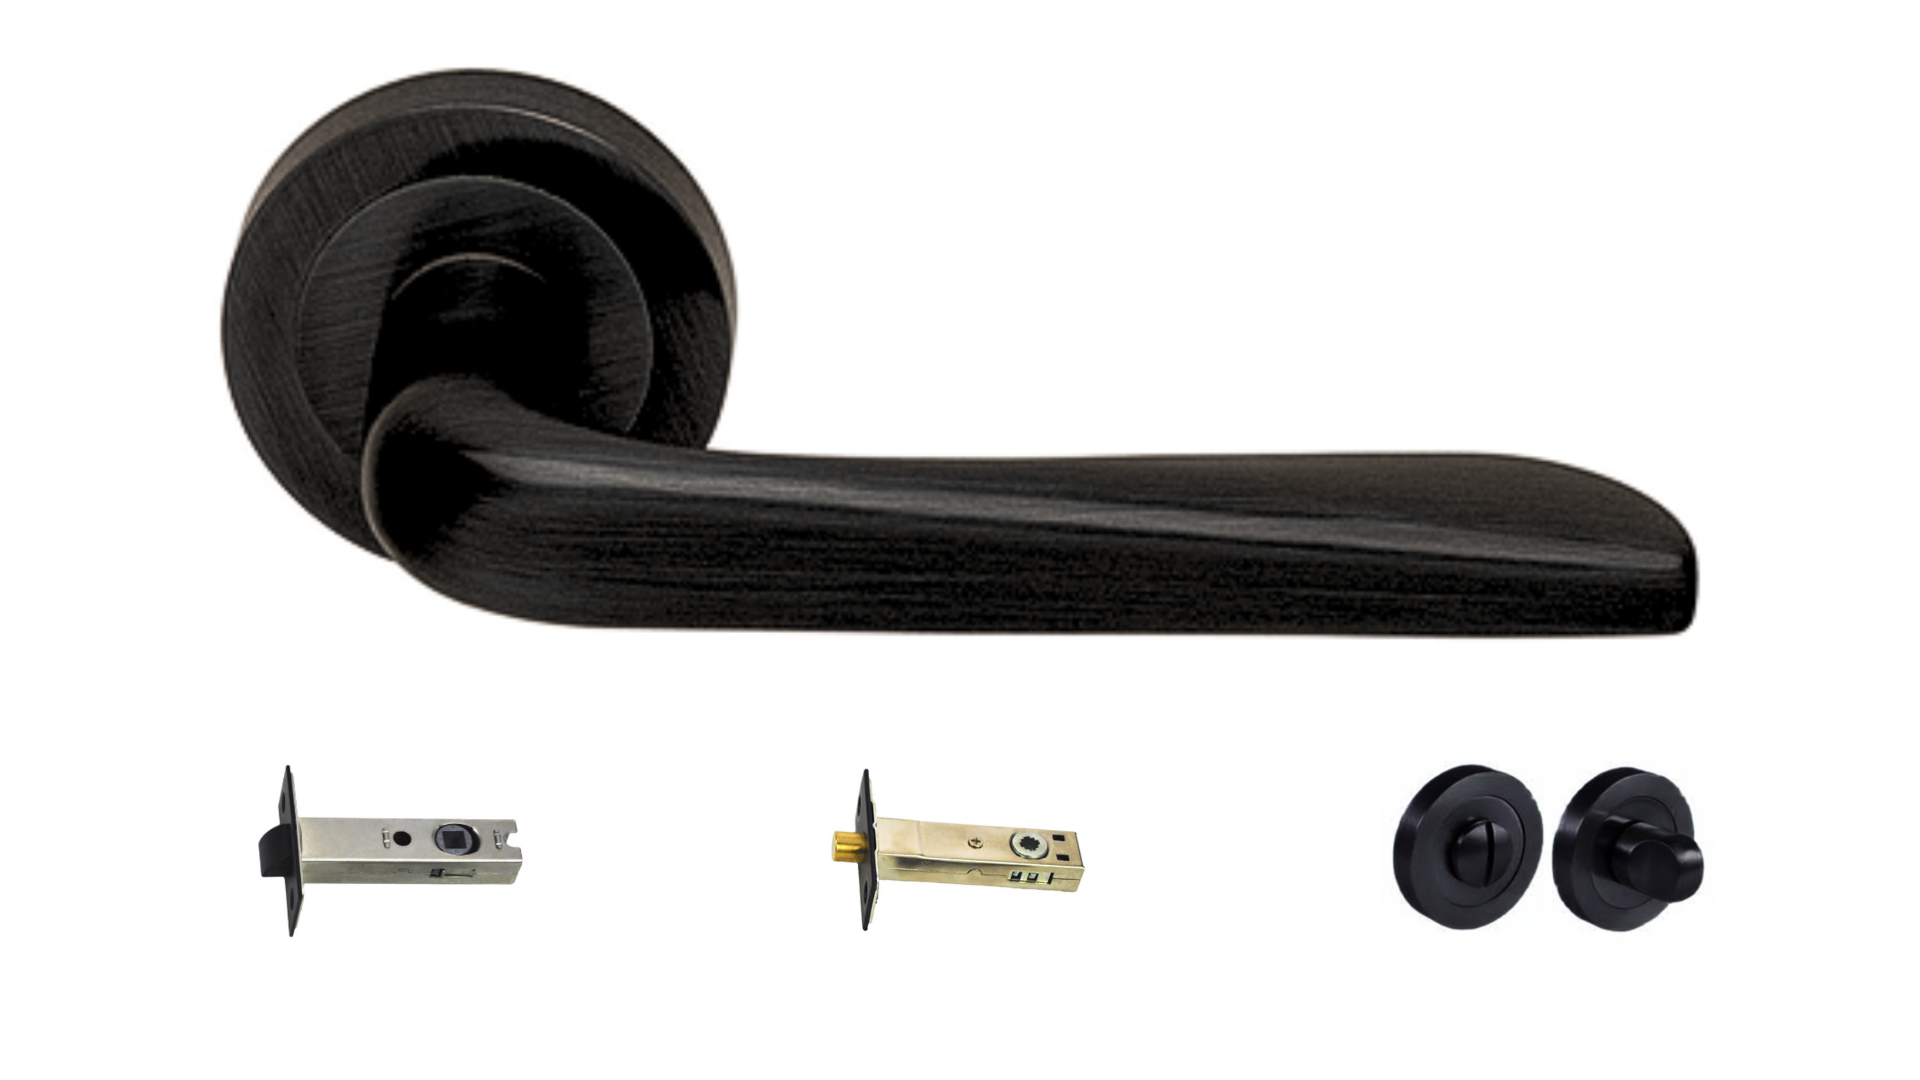 Product picture of the Petra Matt Black Door Handle with accessories tubular latch, privacy turn and release, and a privacy bolt on a white background.